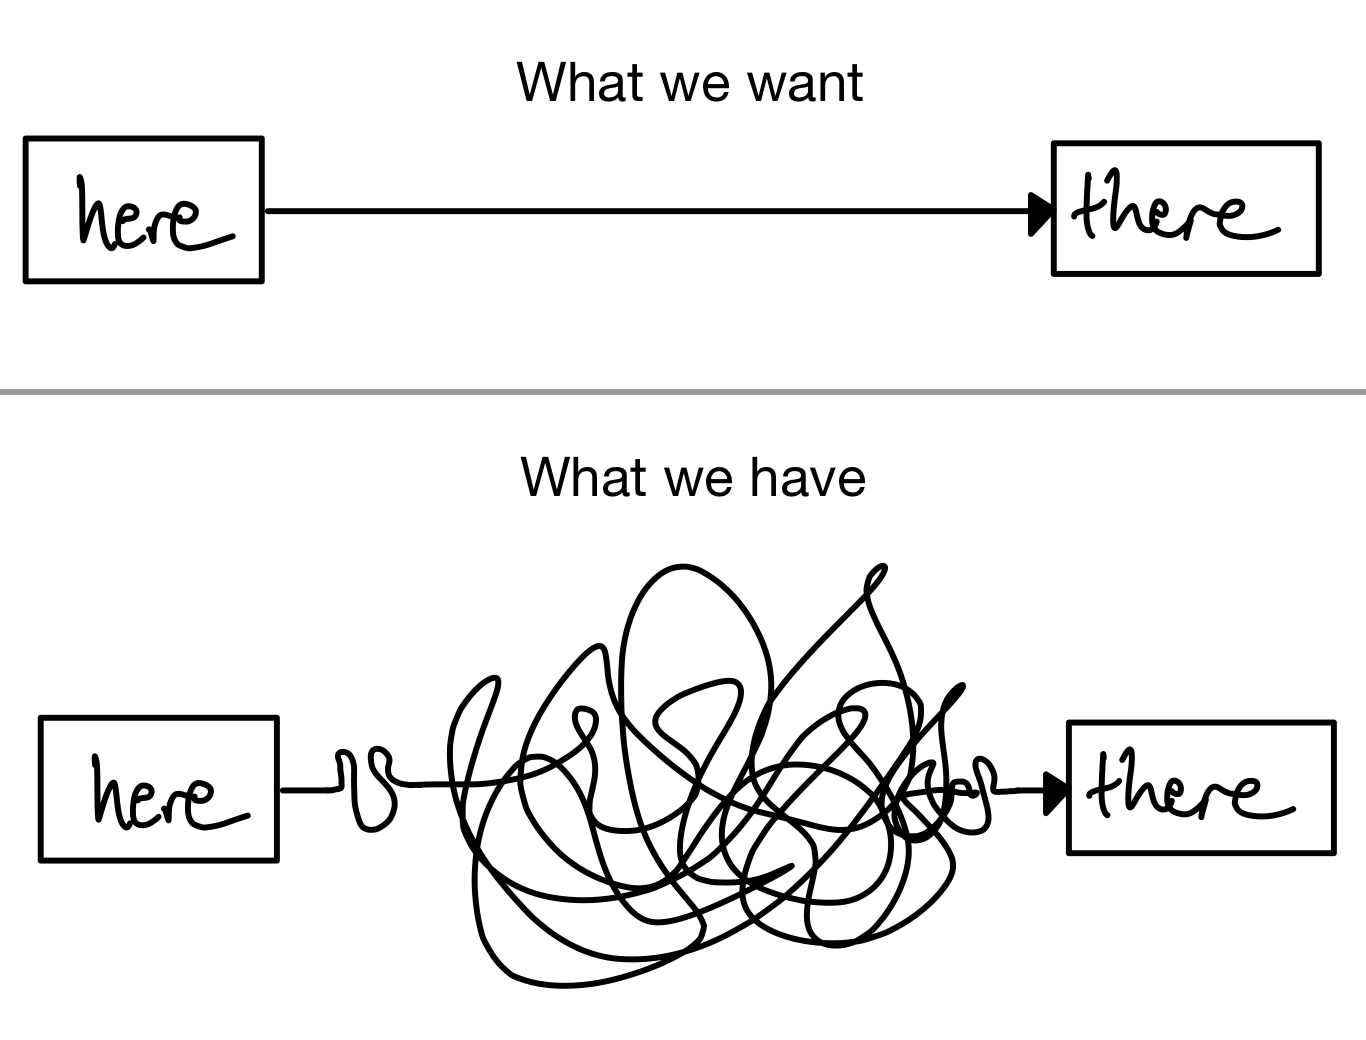 My crude diagram of what we want versus what we have. The top half shows a perfectly straight diagram from here to there, which is what we want. The bottom half shows the same diagram but the line is a jumbled mess between here and there, which is often what we have.